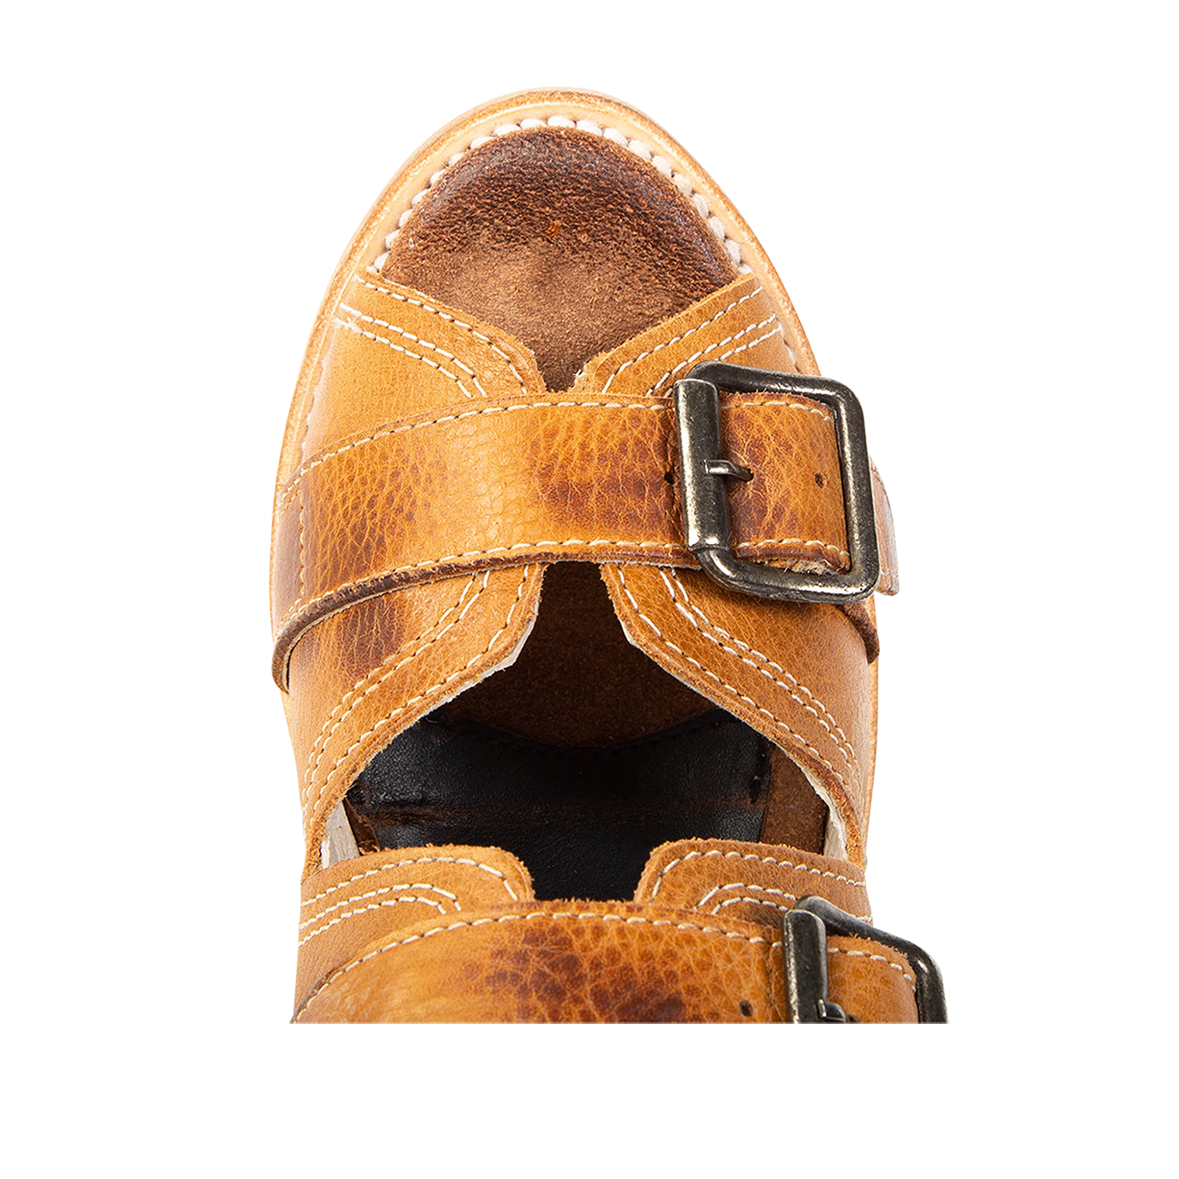 Top view showing leather strap buckle detailing FREEBIRD women's Caprice wheat sandal